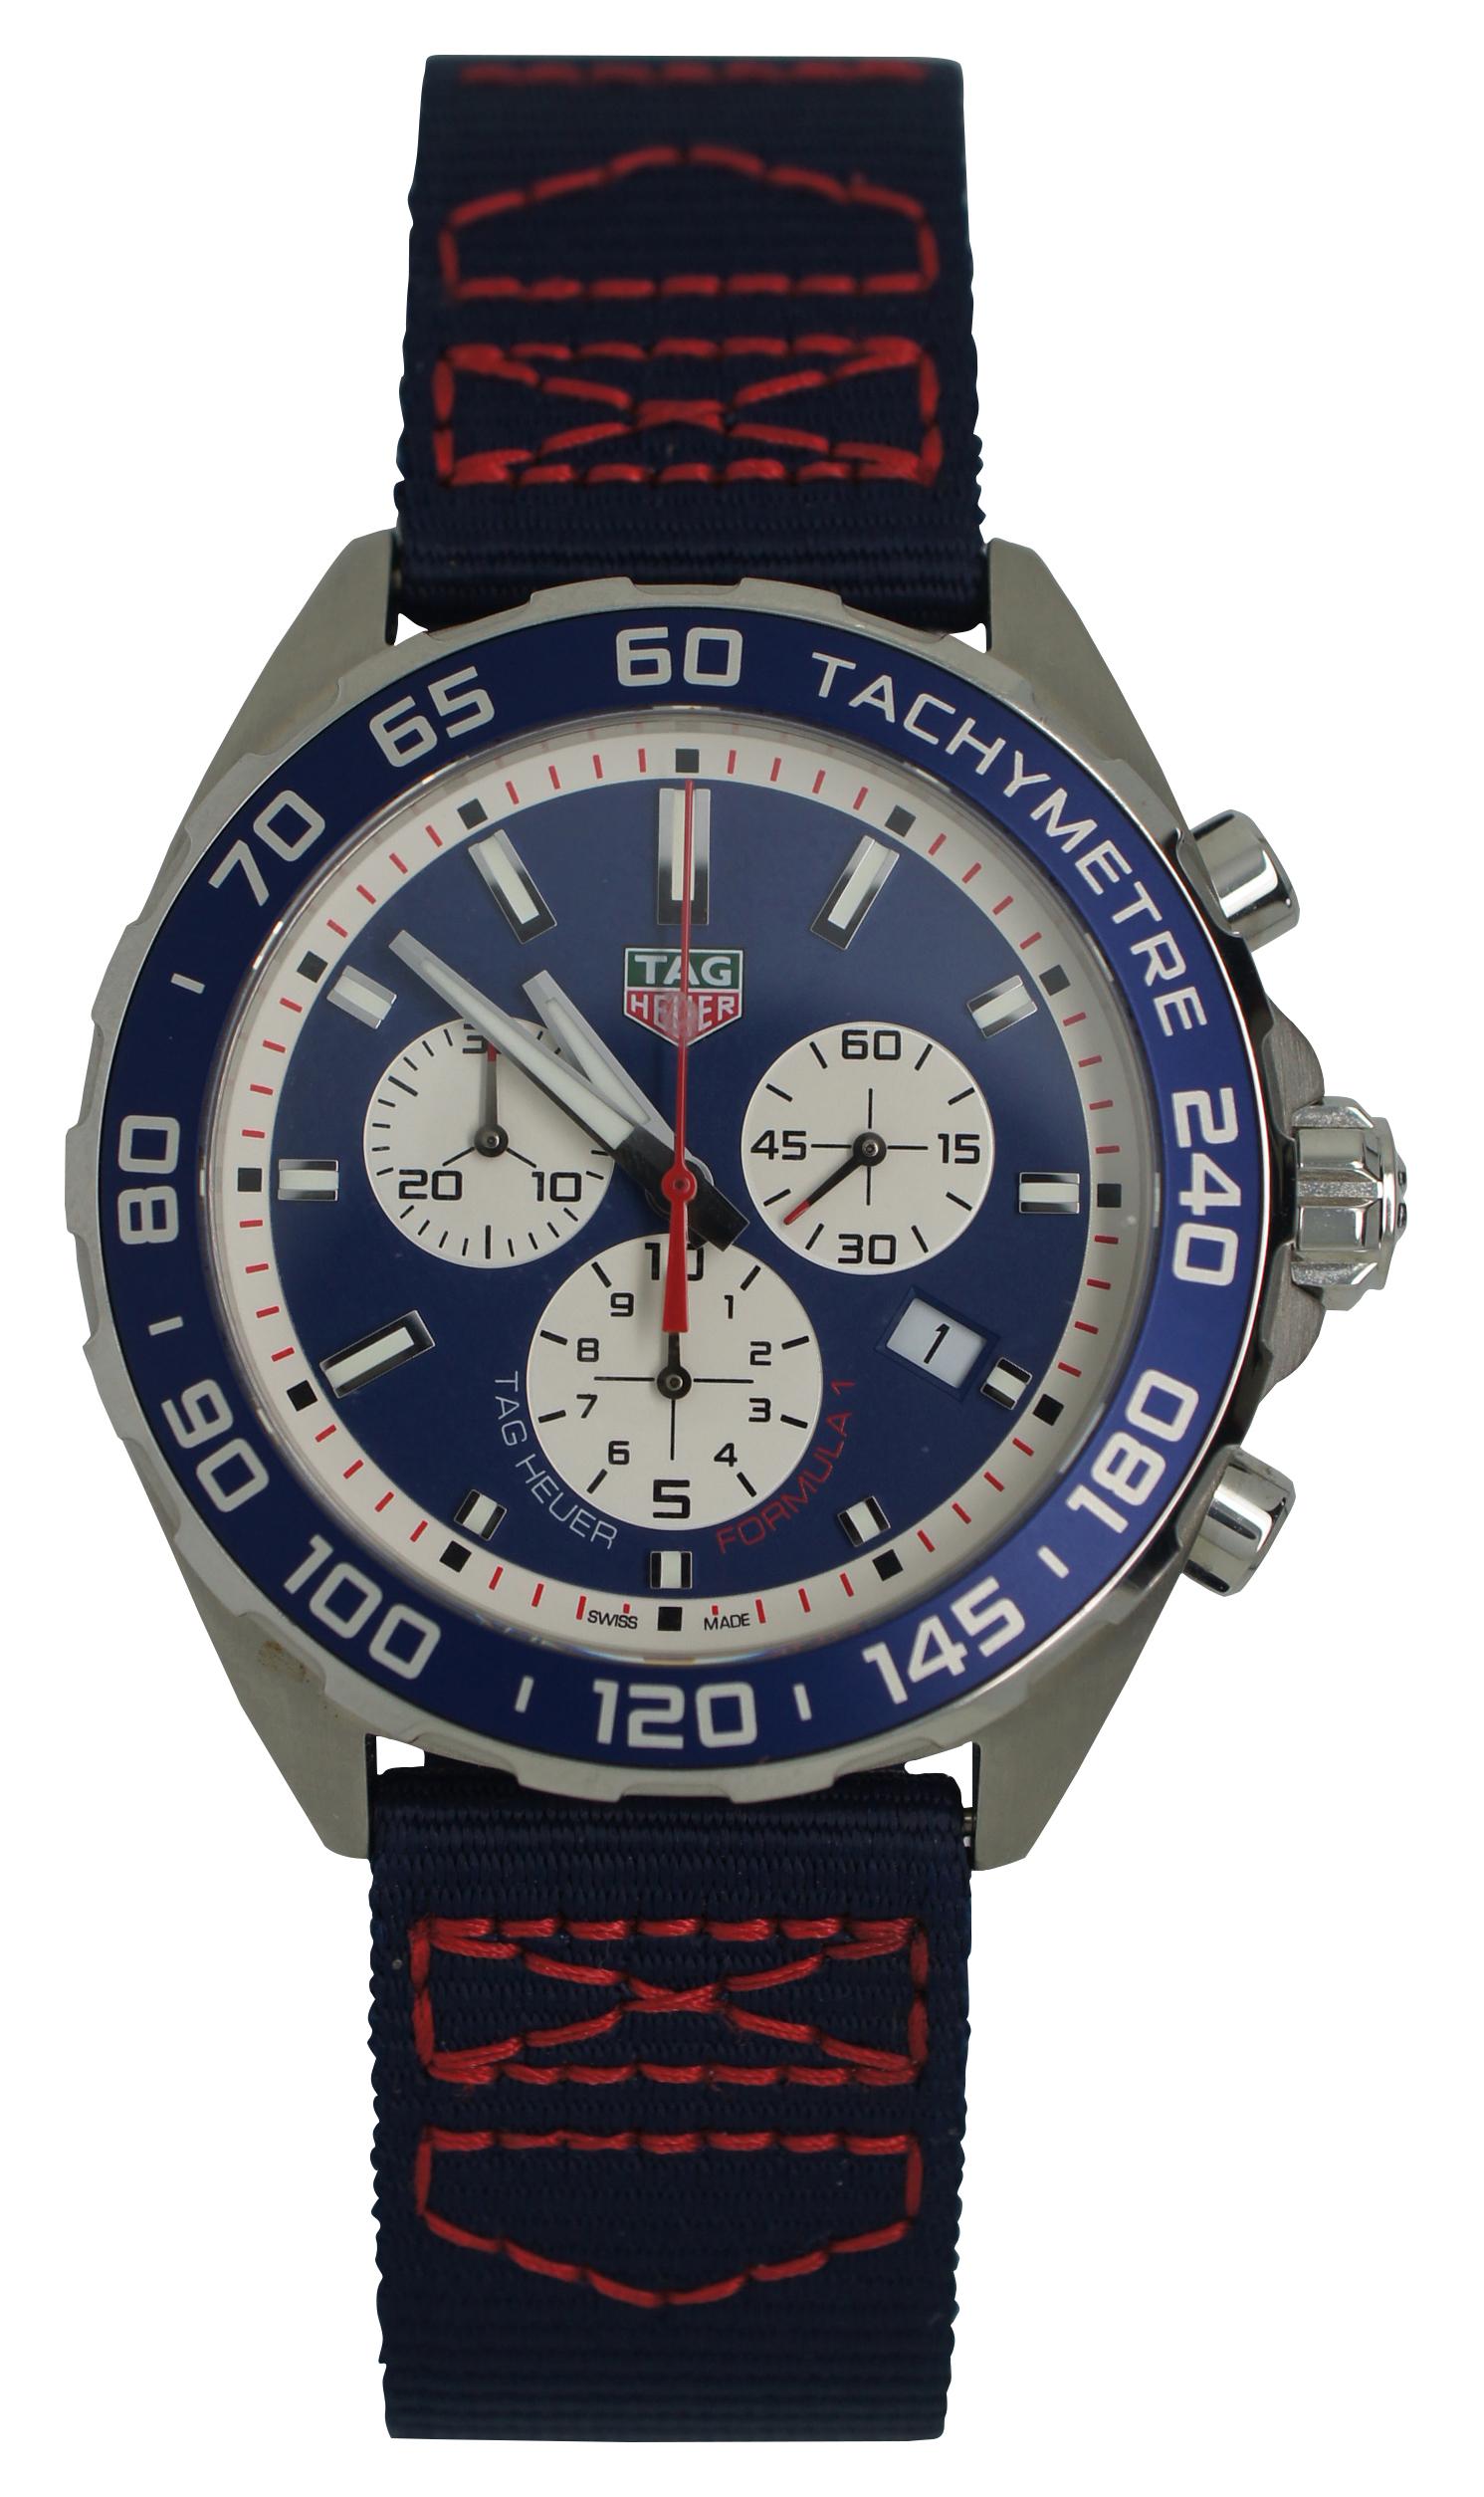 TAG Heuer CAZ1018/WBC1283 Red Bull Racing Formula One Team special edition wrist watch with nylon band.

Adjustable band – 6.5” to 8.75” x 0.875” / Face - 1.75” x 1.875” (Length x Width).